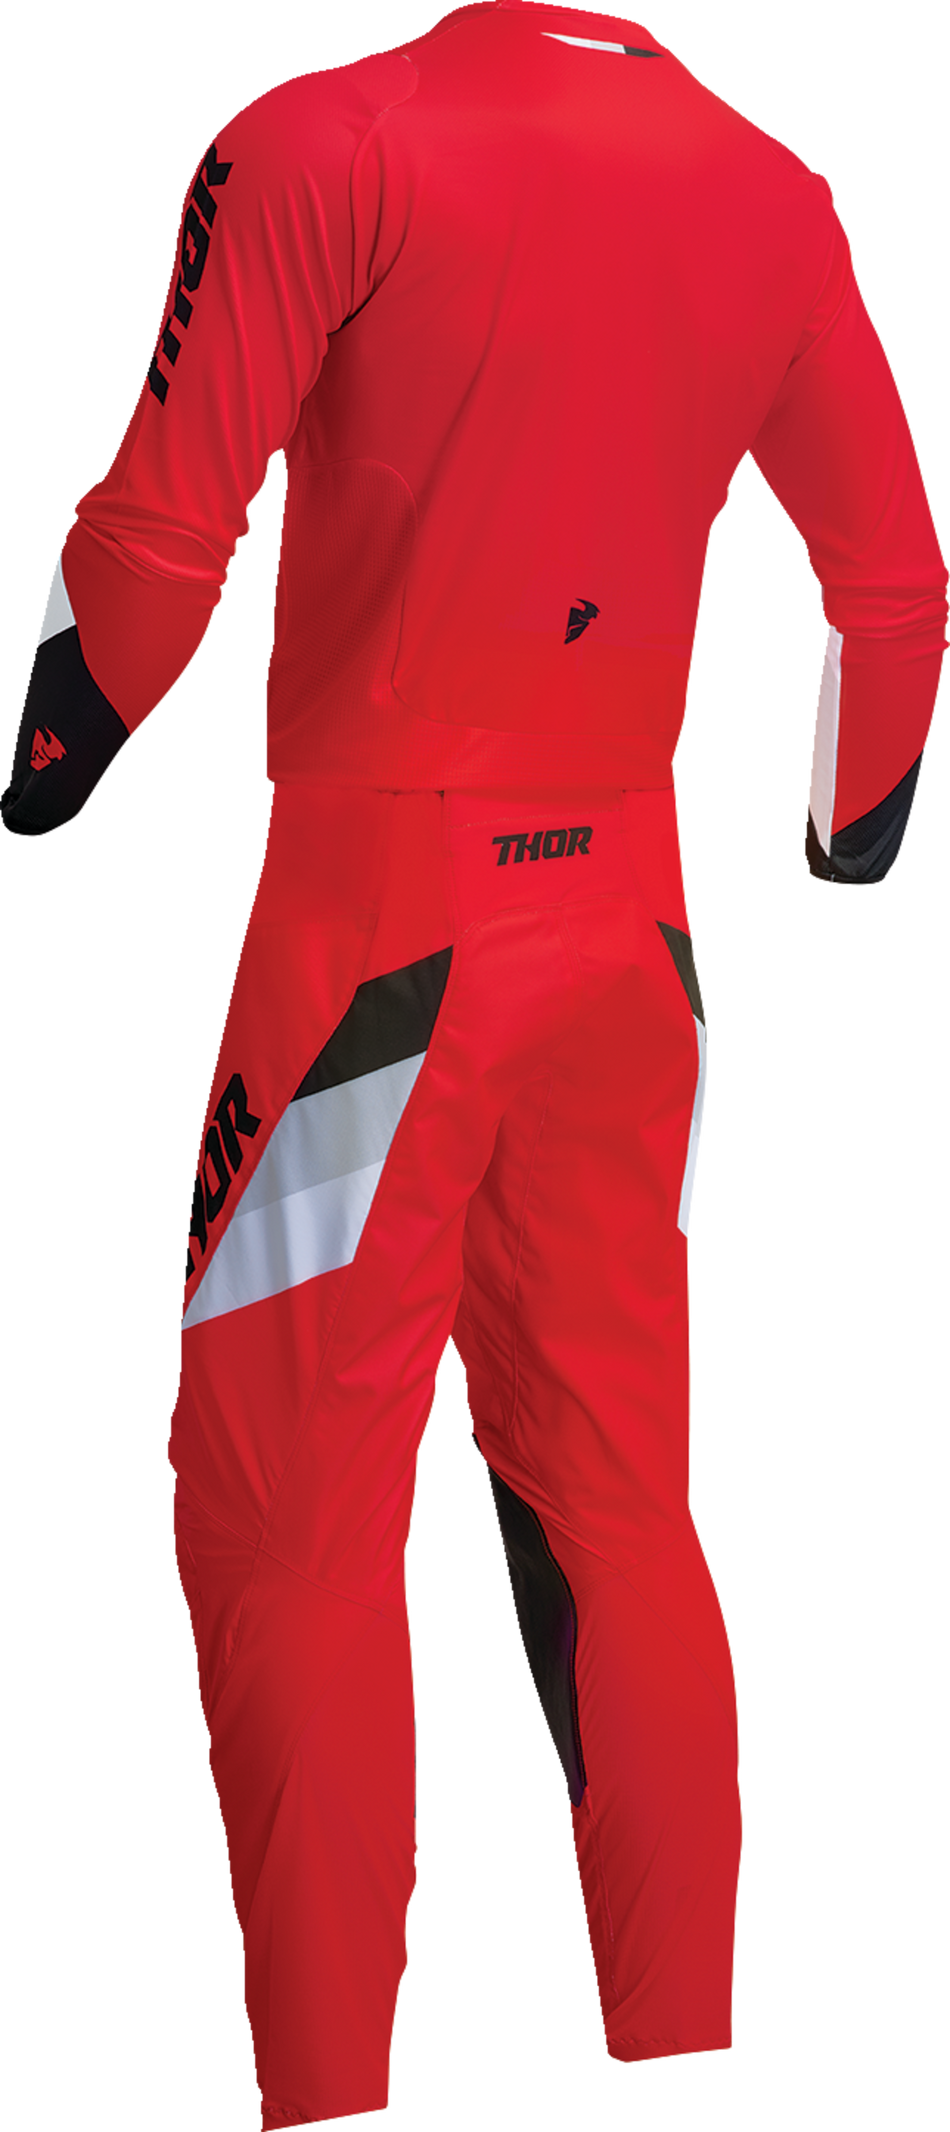 THOR Youth Pulse Tactic Jersey - Red - Large 2912-2207